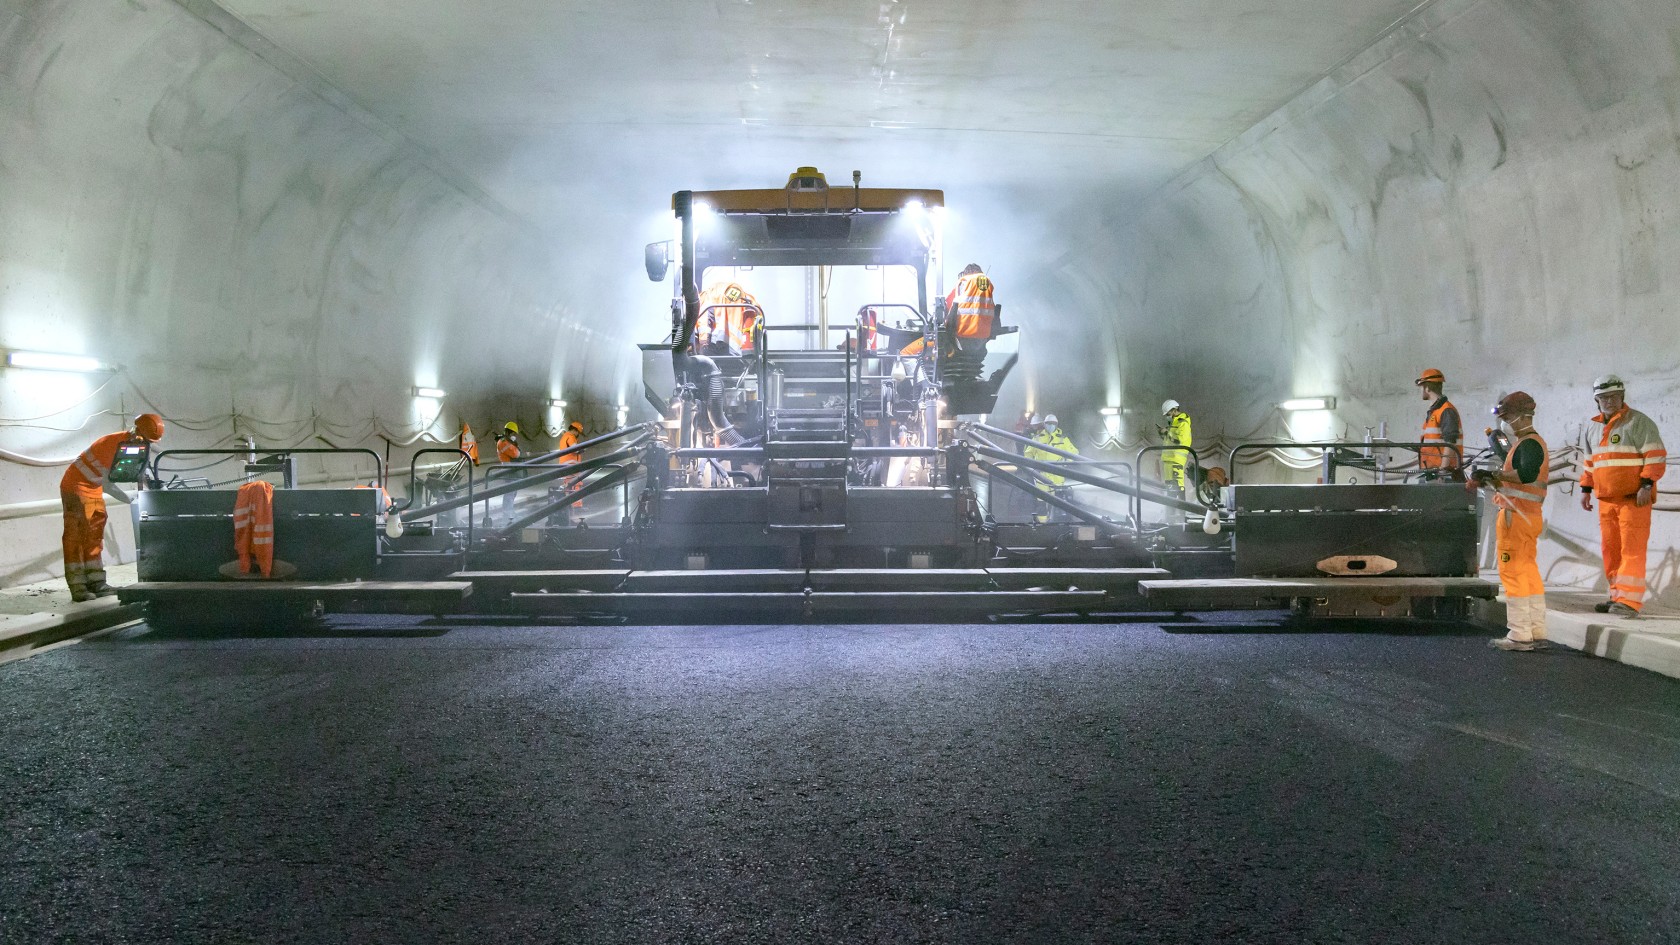 Seamless paving job in Switzerland’s widest tunnel featuring the Vögele SUPER 2100-3i paver.